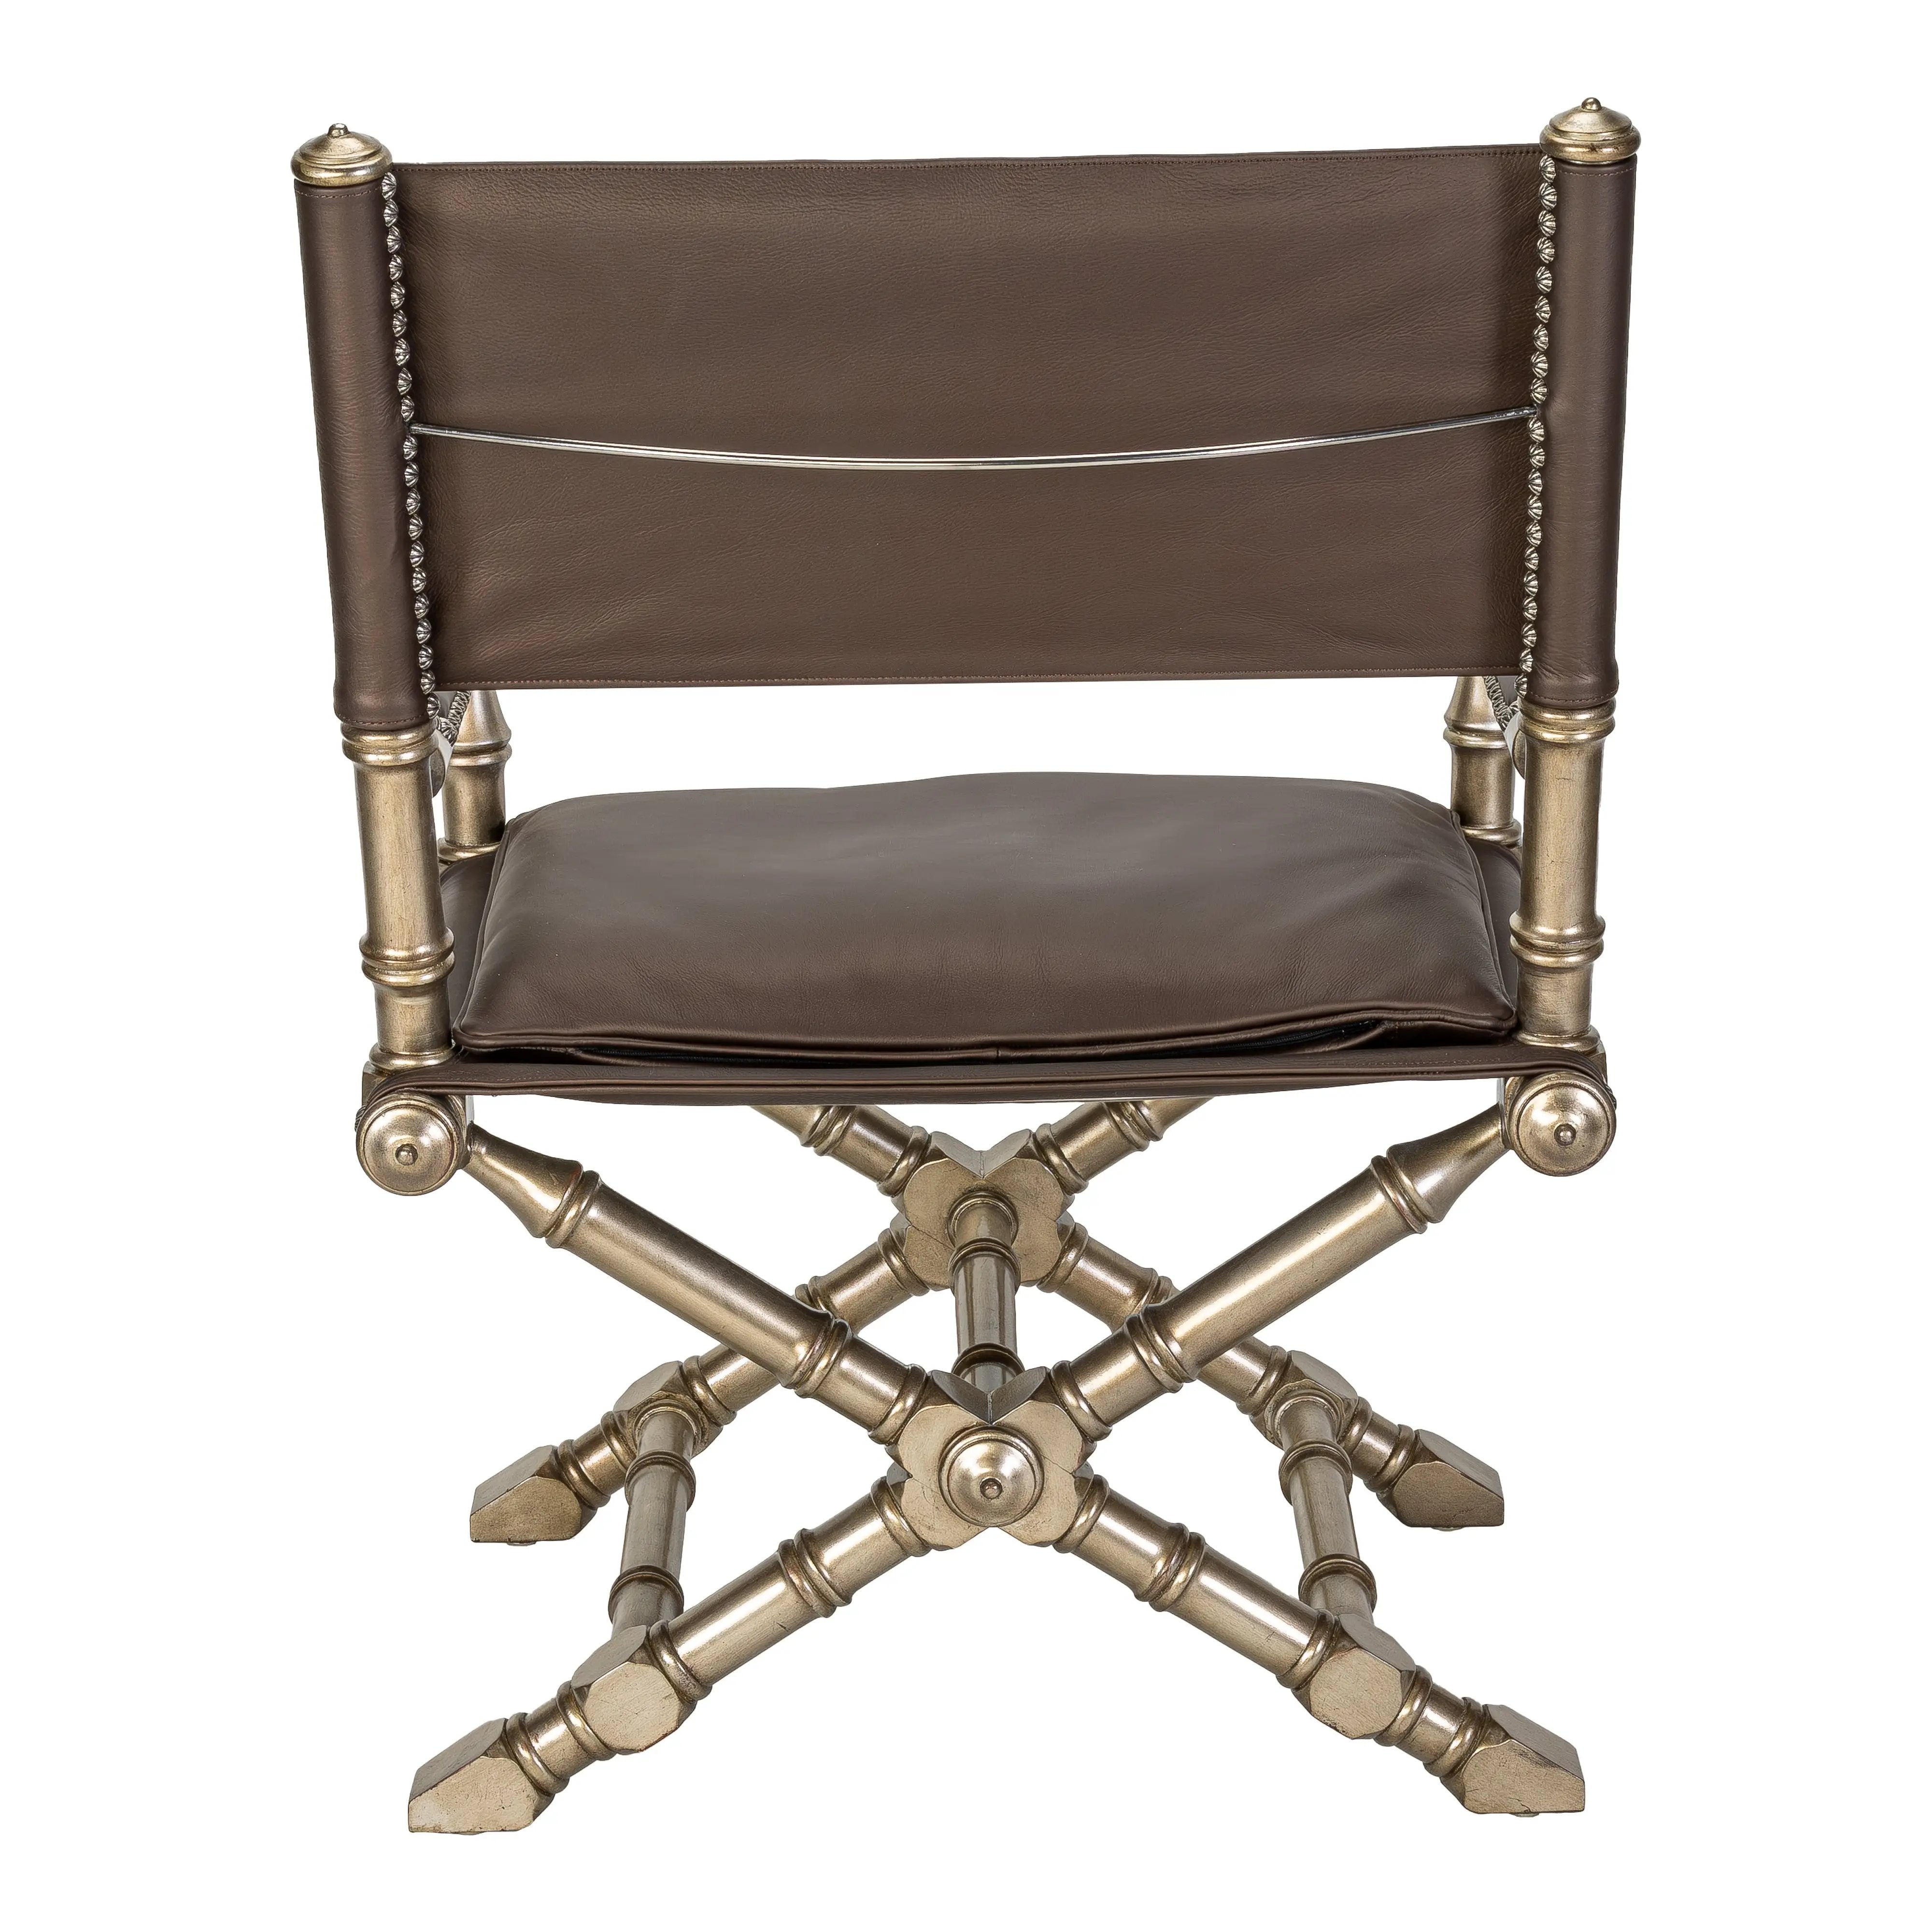 Barrymore Chair